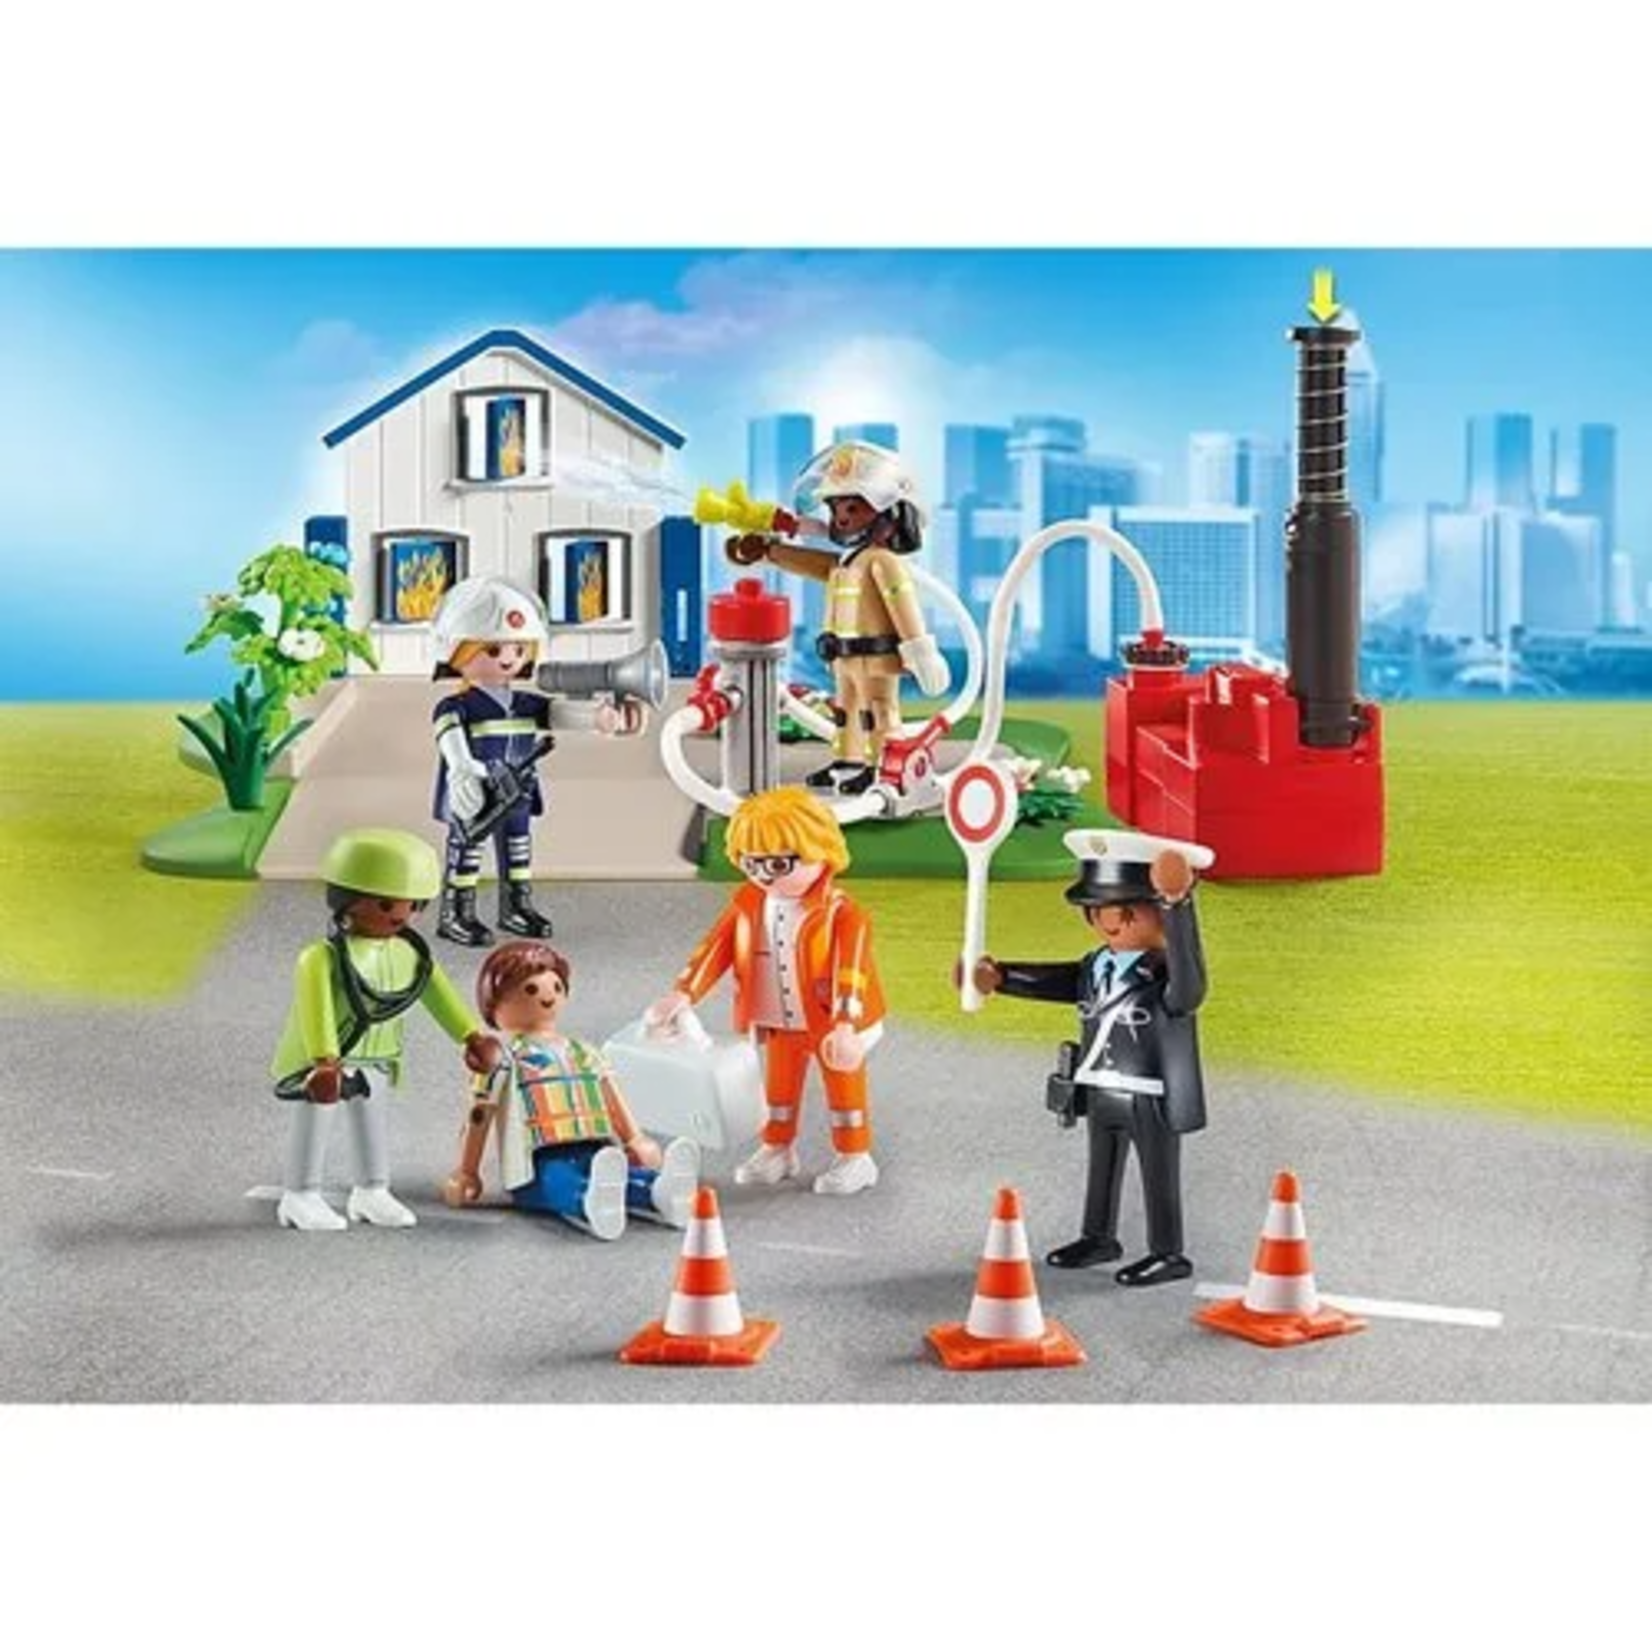 Playmobil My Figures: Rescue Mission - Playmobil 70980